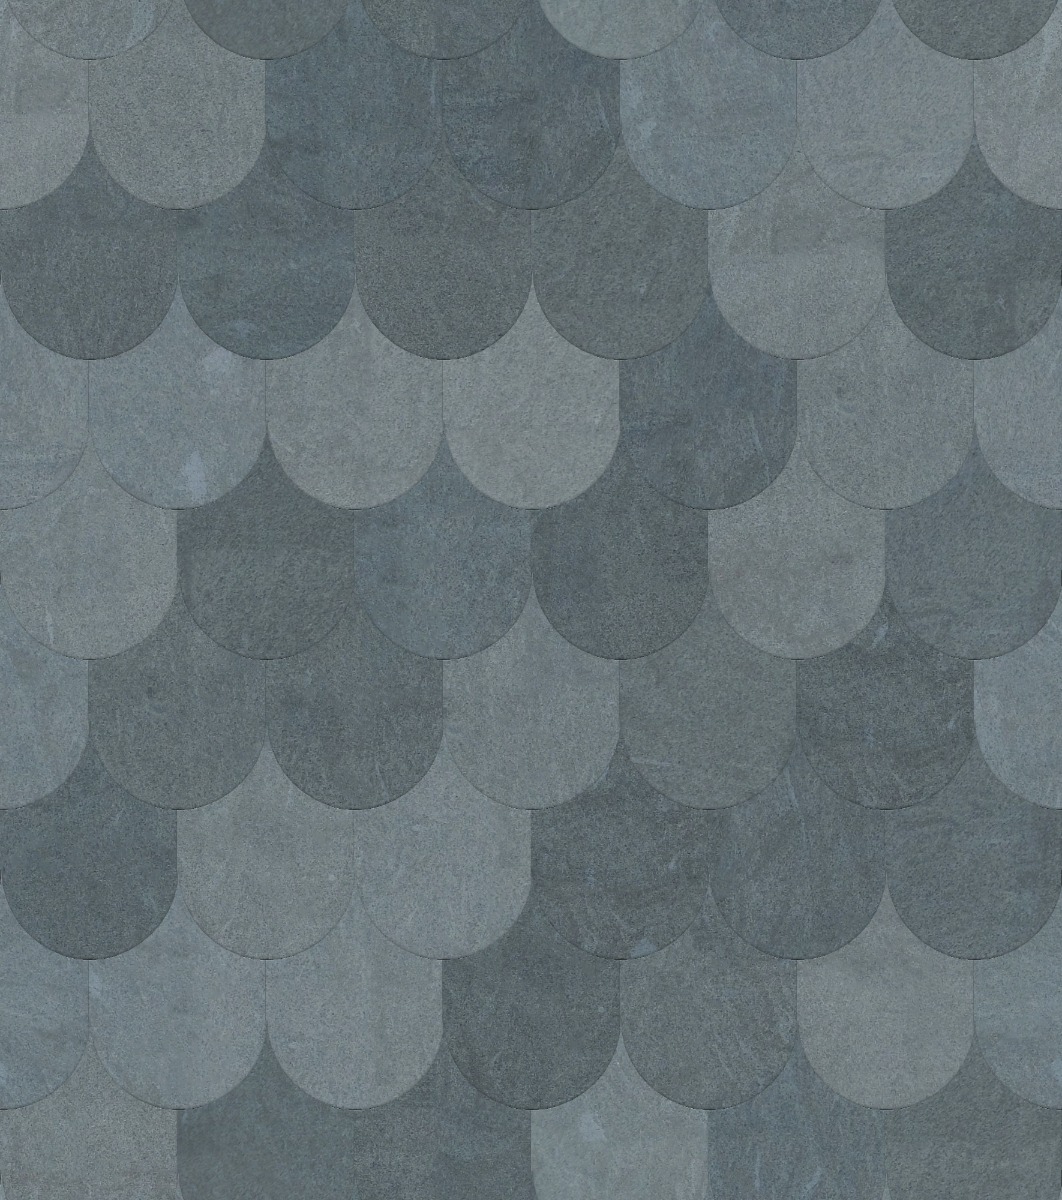 A seamless stone texture with slate blocks arranged in a Fishscale pattern